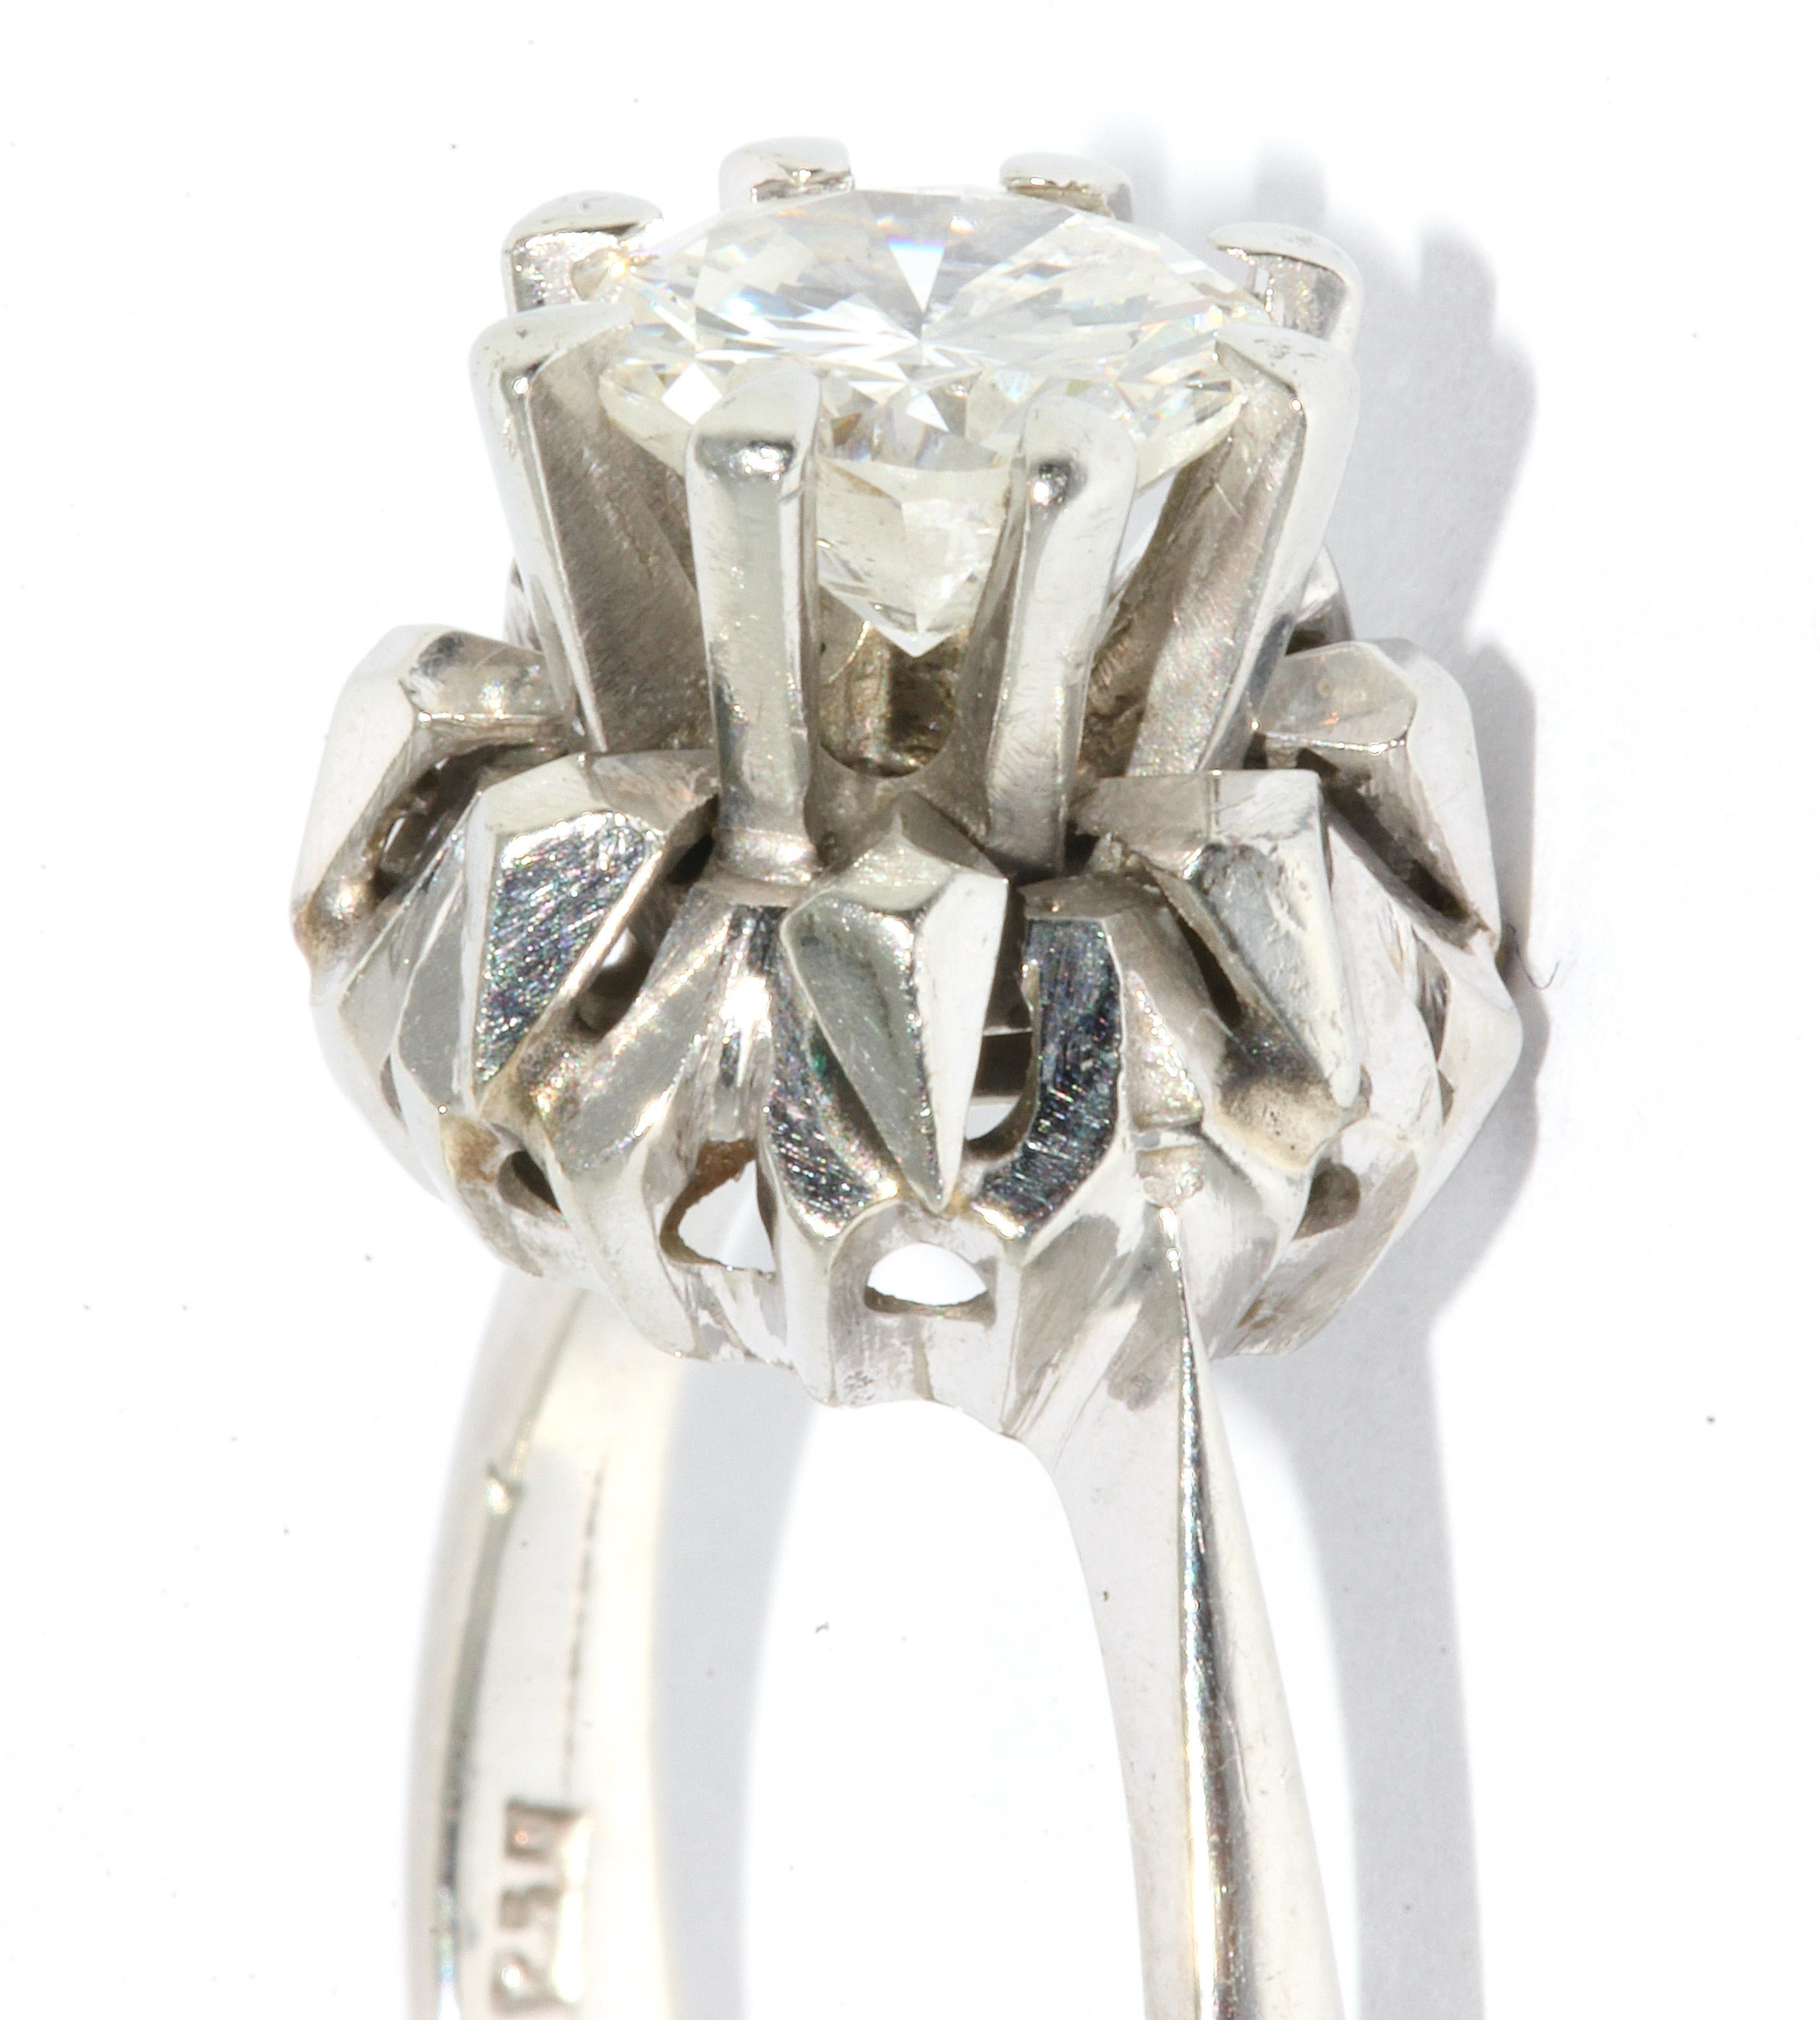 18 Karat White Gold Ring Set with 1.11 Carat White Solitaire Diamond For Sale 1